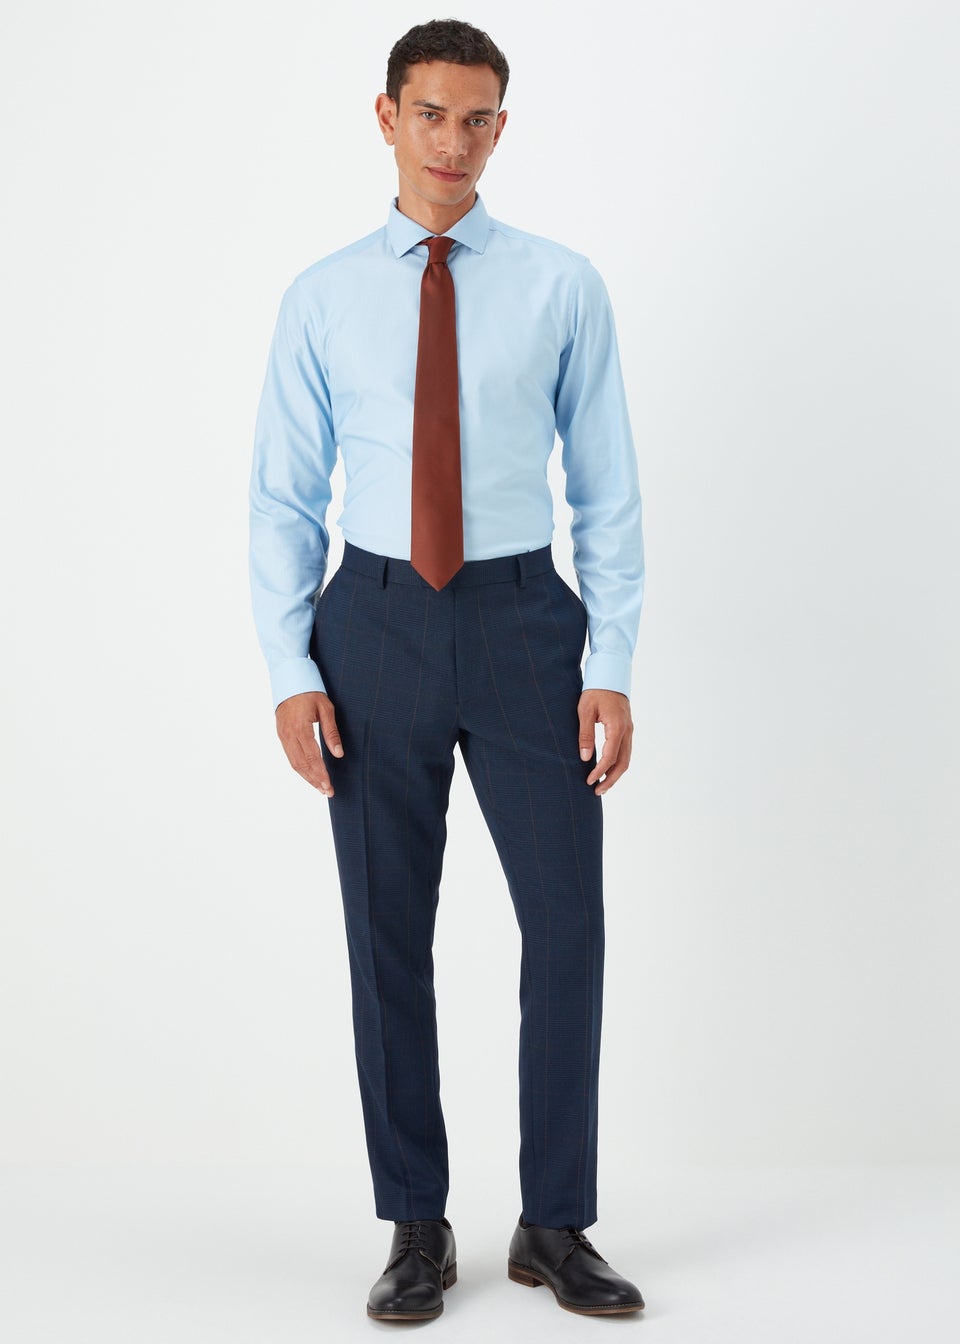 Taylor & Wright Westminster Navy Skinny Fit Suit Trousers